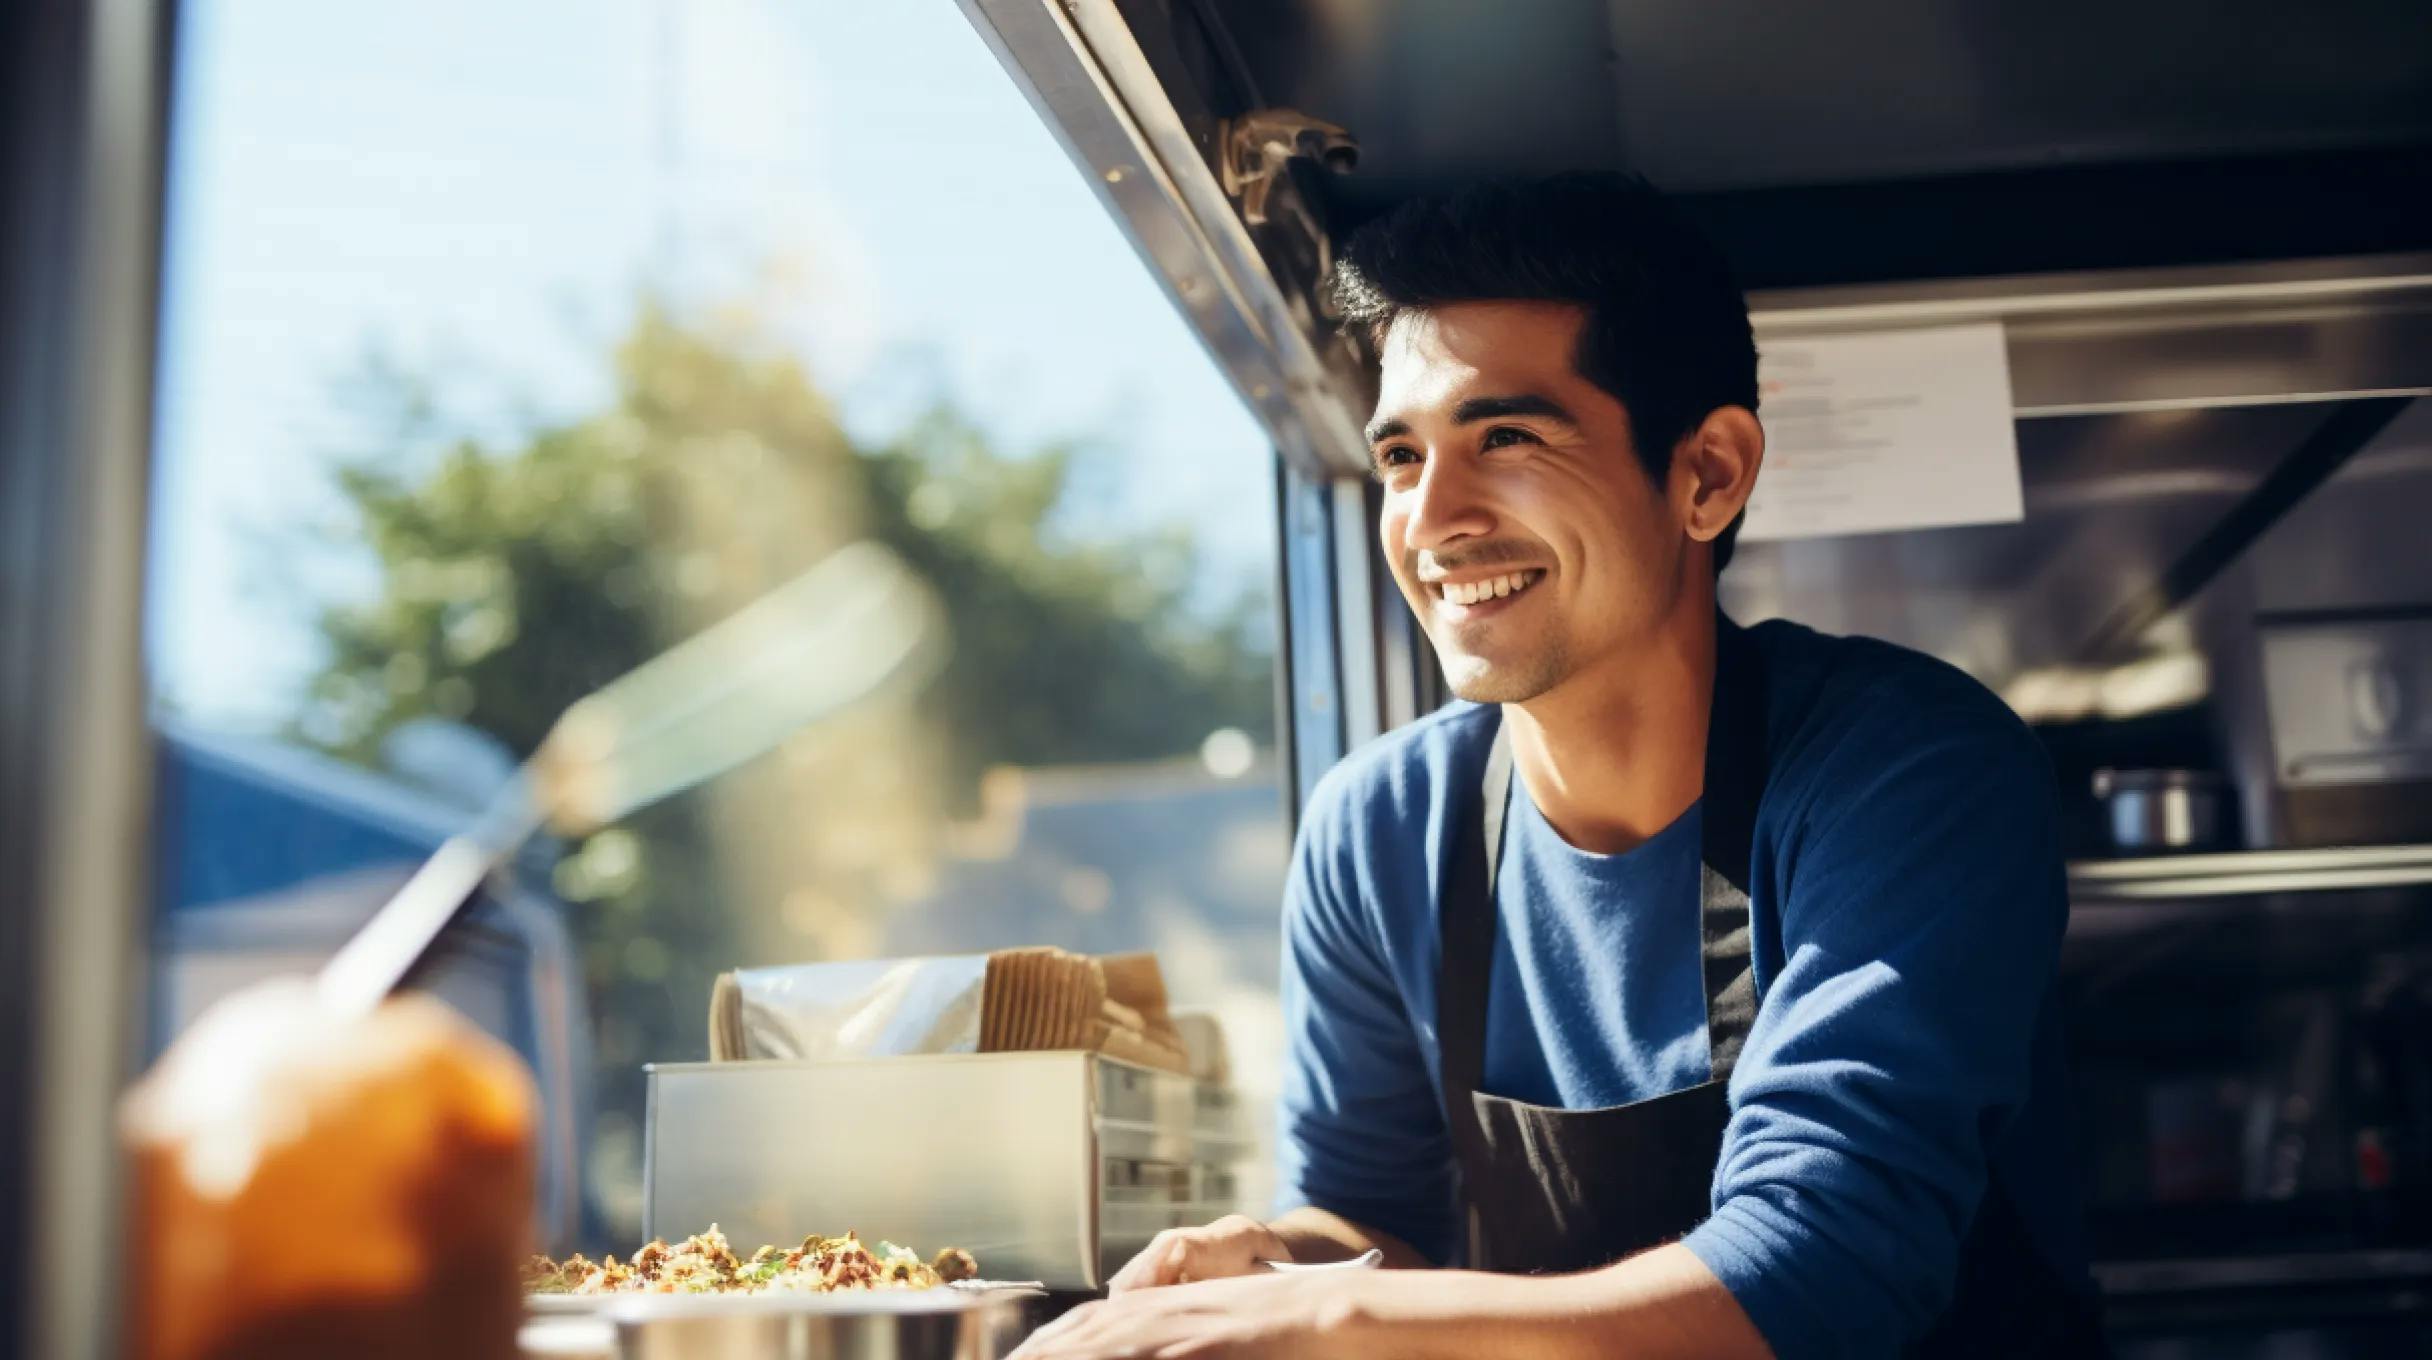 A man with a cheerful expression is seen working in a food truck, radiating happiness and dedication.